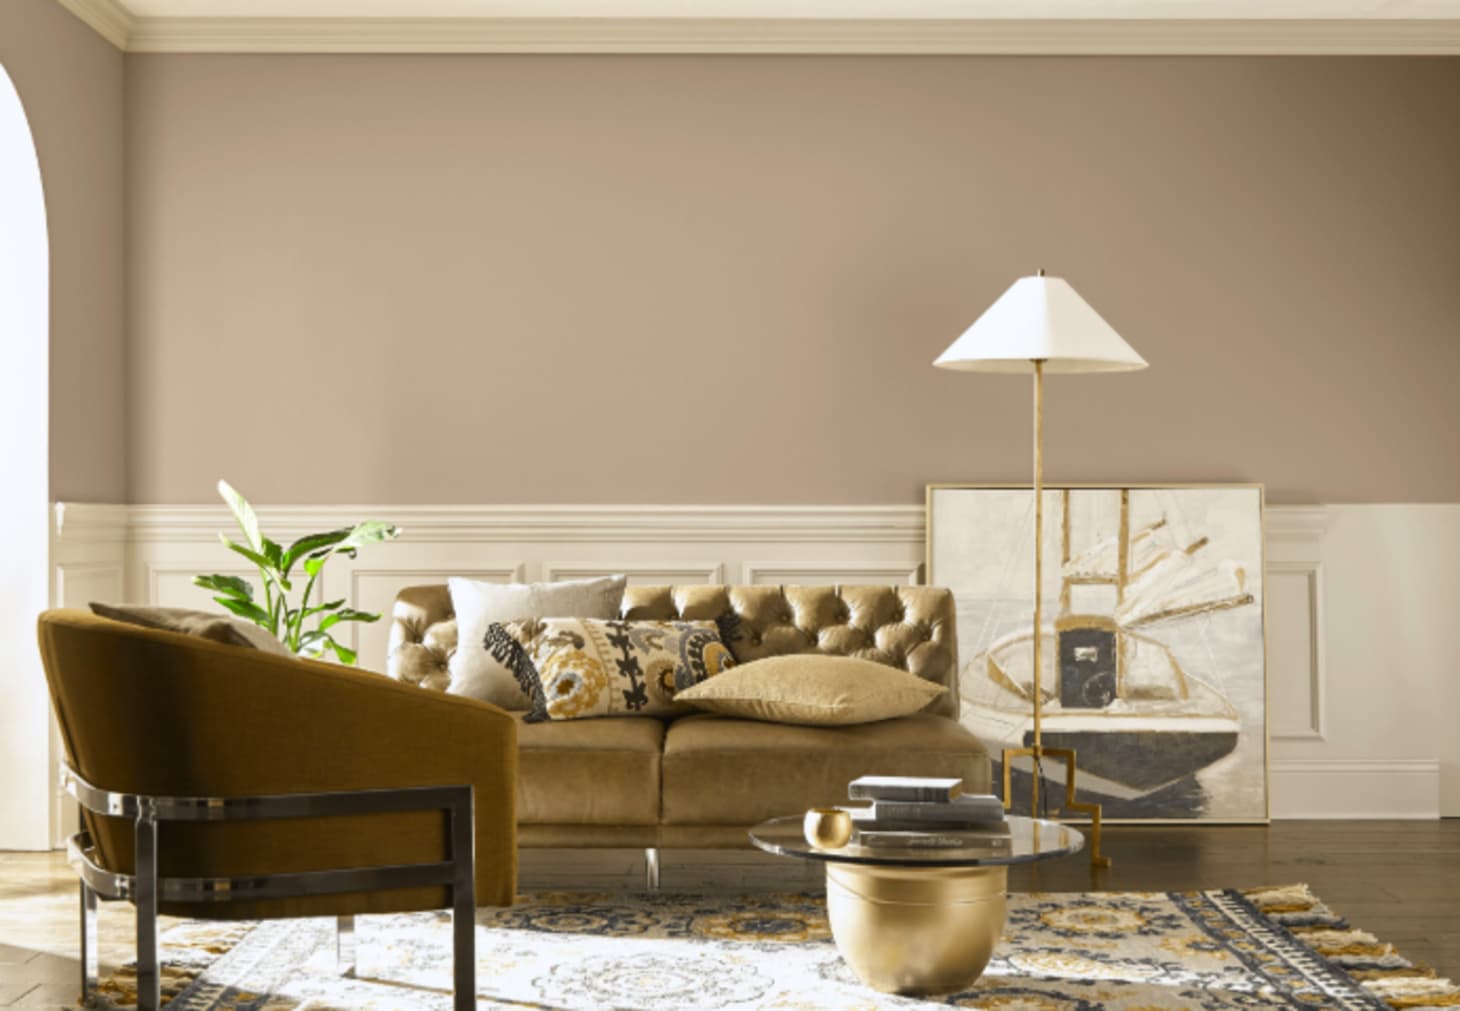 Shades Of Tan Paint For Living Room